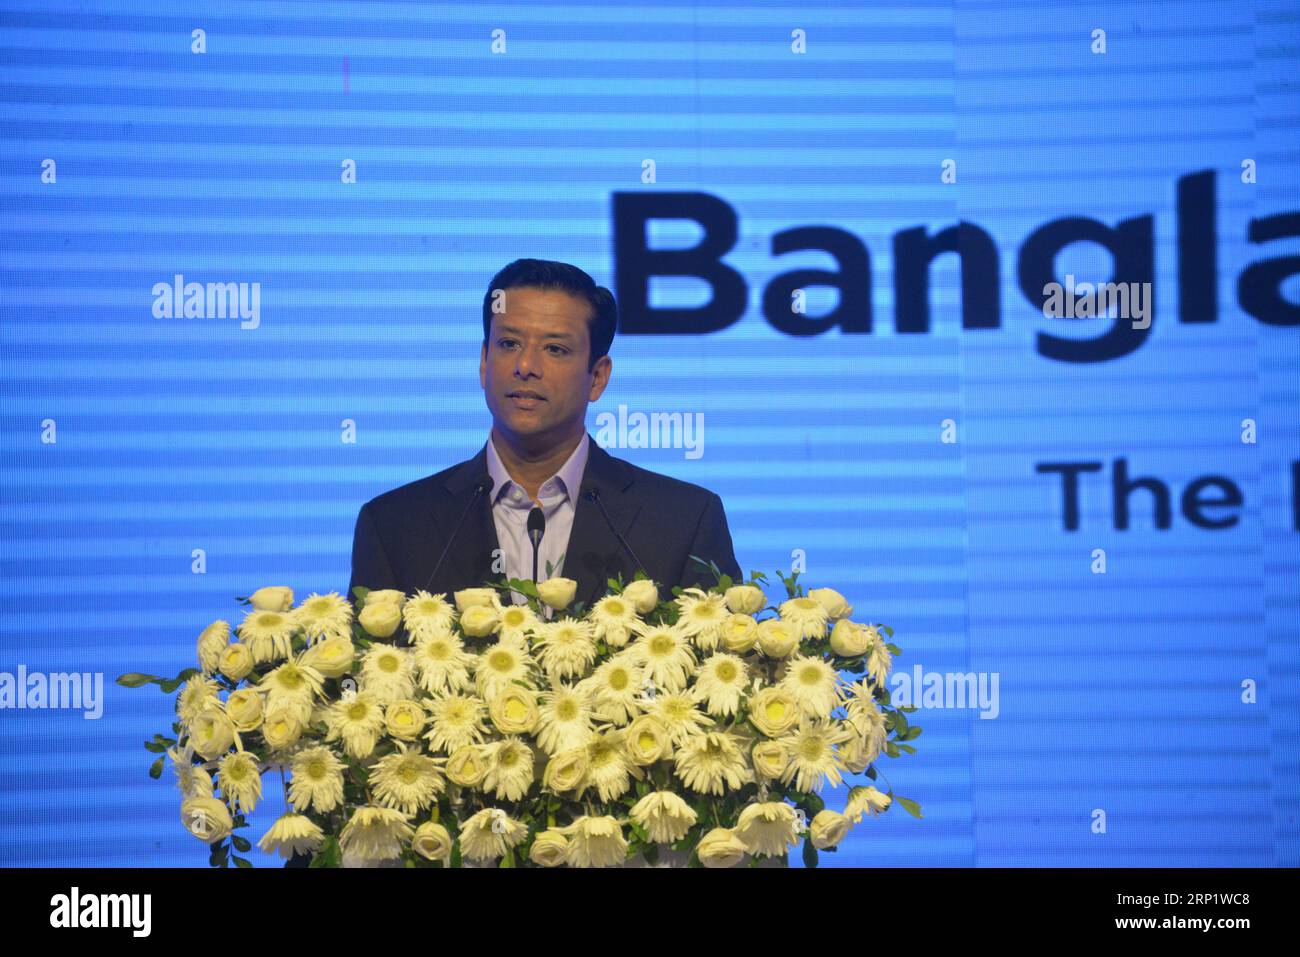 (180725) -- DHAKA, July 25, 2018 () -- Bangladeshi Prime Minister s ICT Affairs Adviser Sajeeb Wazed Joy delivers a speech at the Bangladesh 5G Summit 2018 in Dhaka, Bangladesh, on July 25, 2018. Chinese telecommunications giant Huawei conducted Bangladesh s first trial of fifth generation network (5G) teaming up with the Bangladeshi government s Posts & Telecommunications Division, the Ministry of Posts, Telecommunications and Information Technology and Robi, a joint venture of Axiata Group Berhad (Malaysia), Bharti Airtel Limited (India) and NTT DoCoMo Inc. (Japan), at a ceremony in the capi Stock Photo